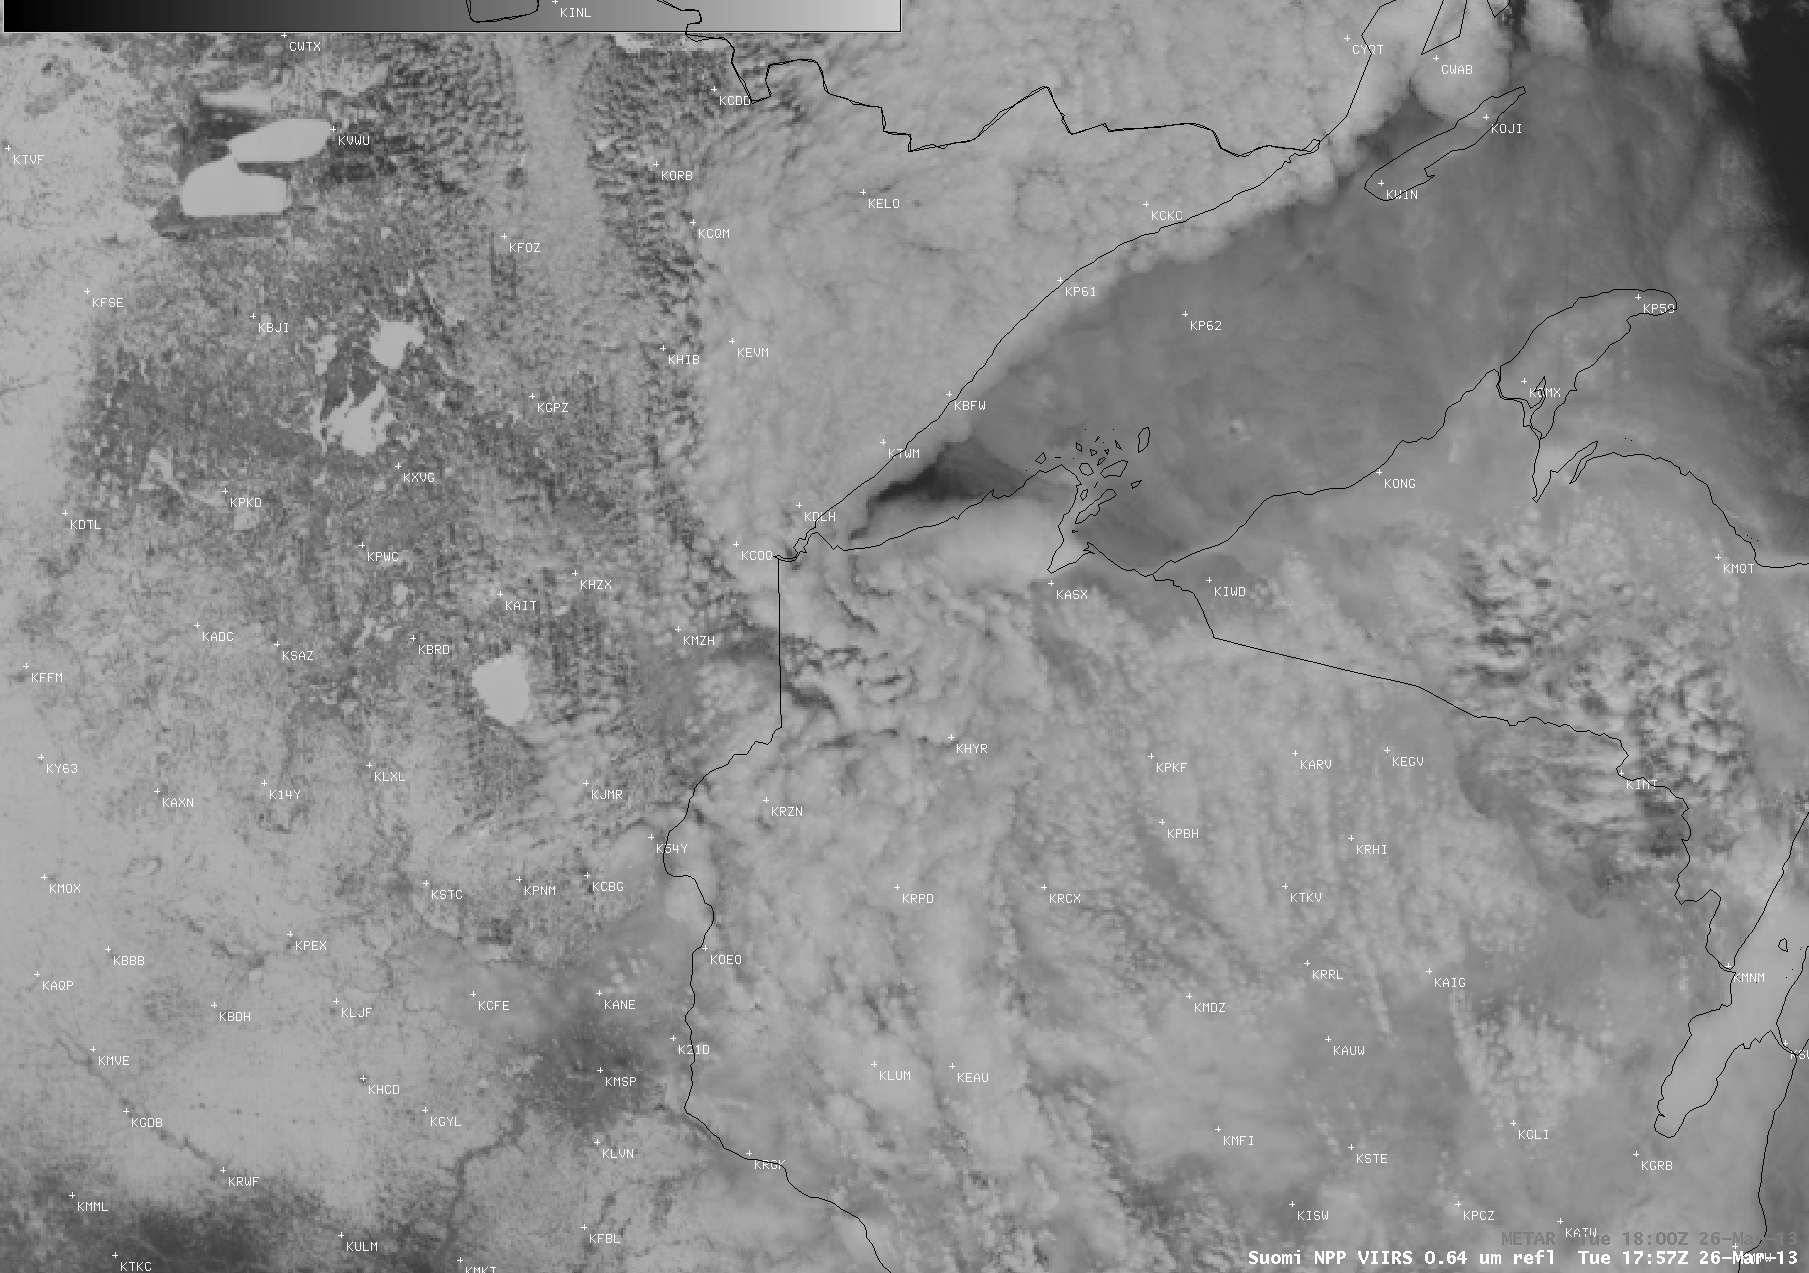 Suomi NPP VIIRS 0.64 Âµm visible channel and 11.45 Âµm IR channel images